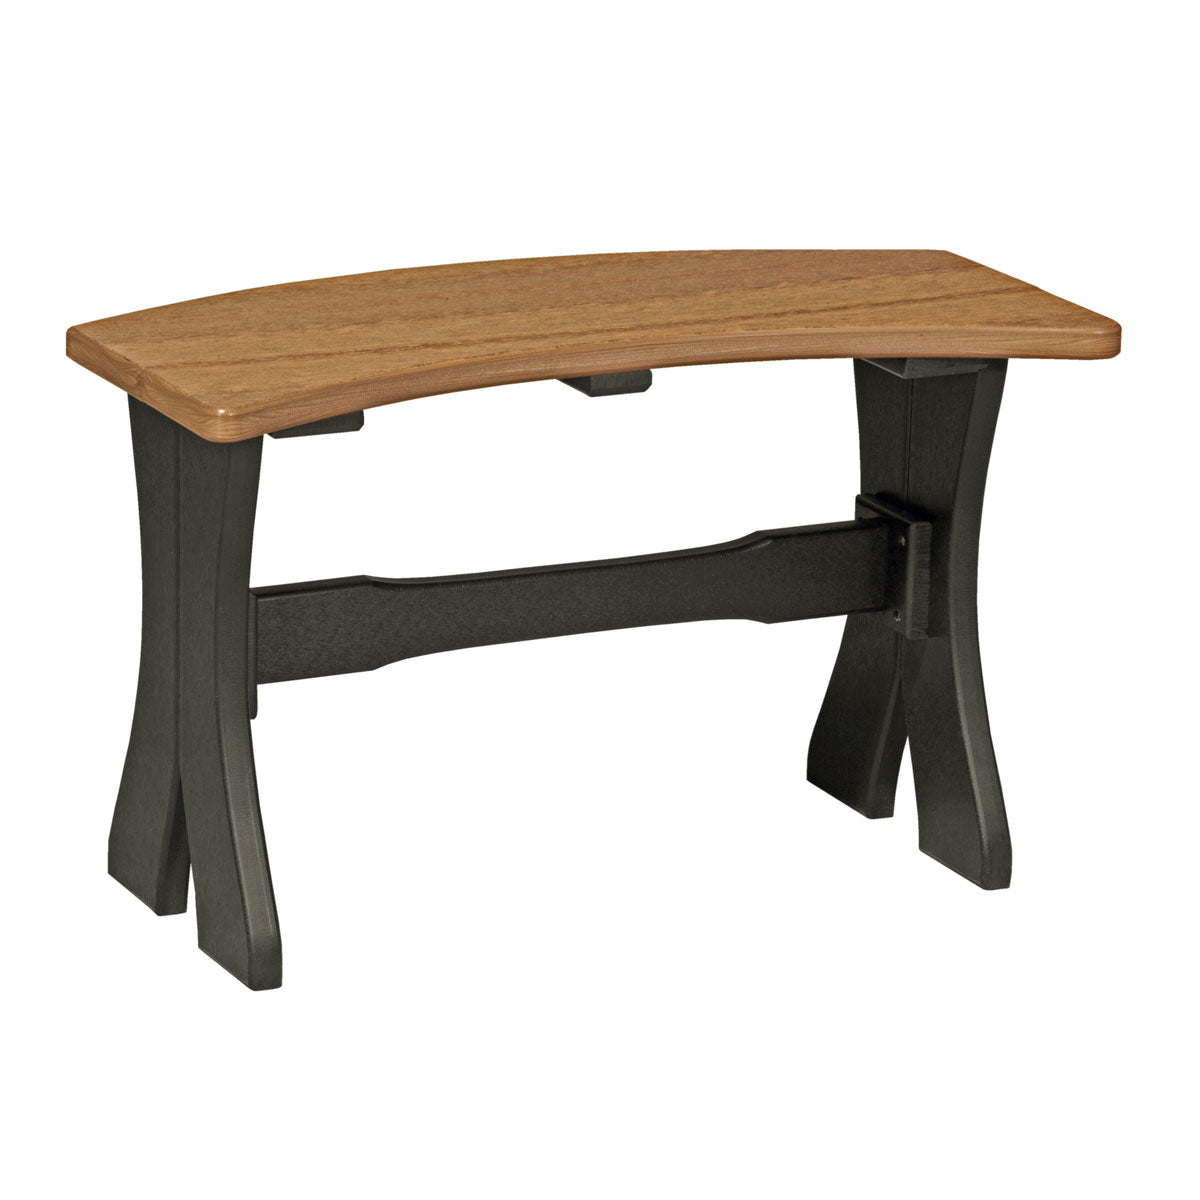 Luxcraft 28" Table Bench P28TB